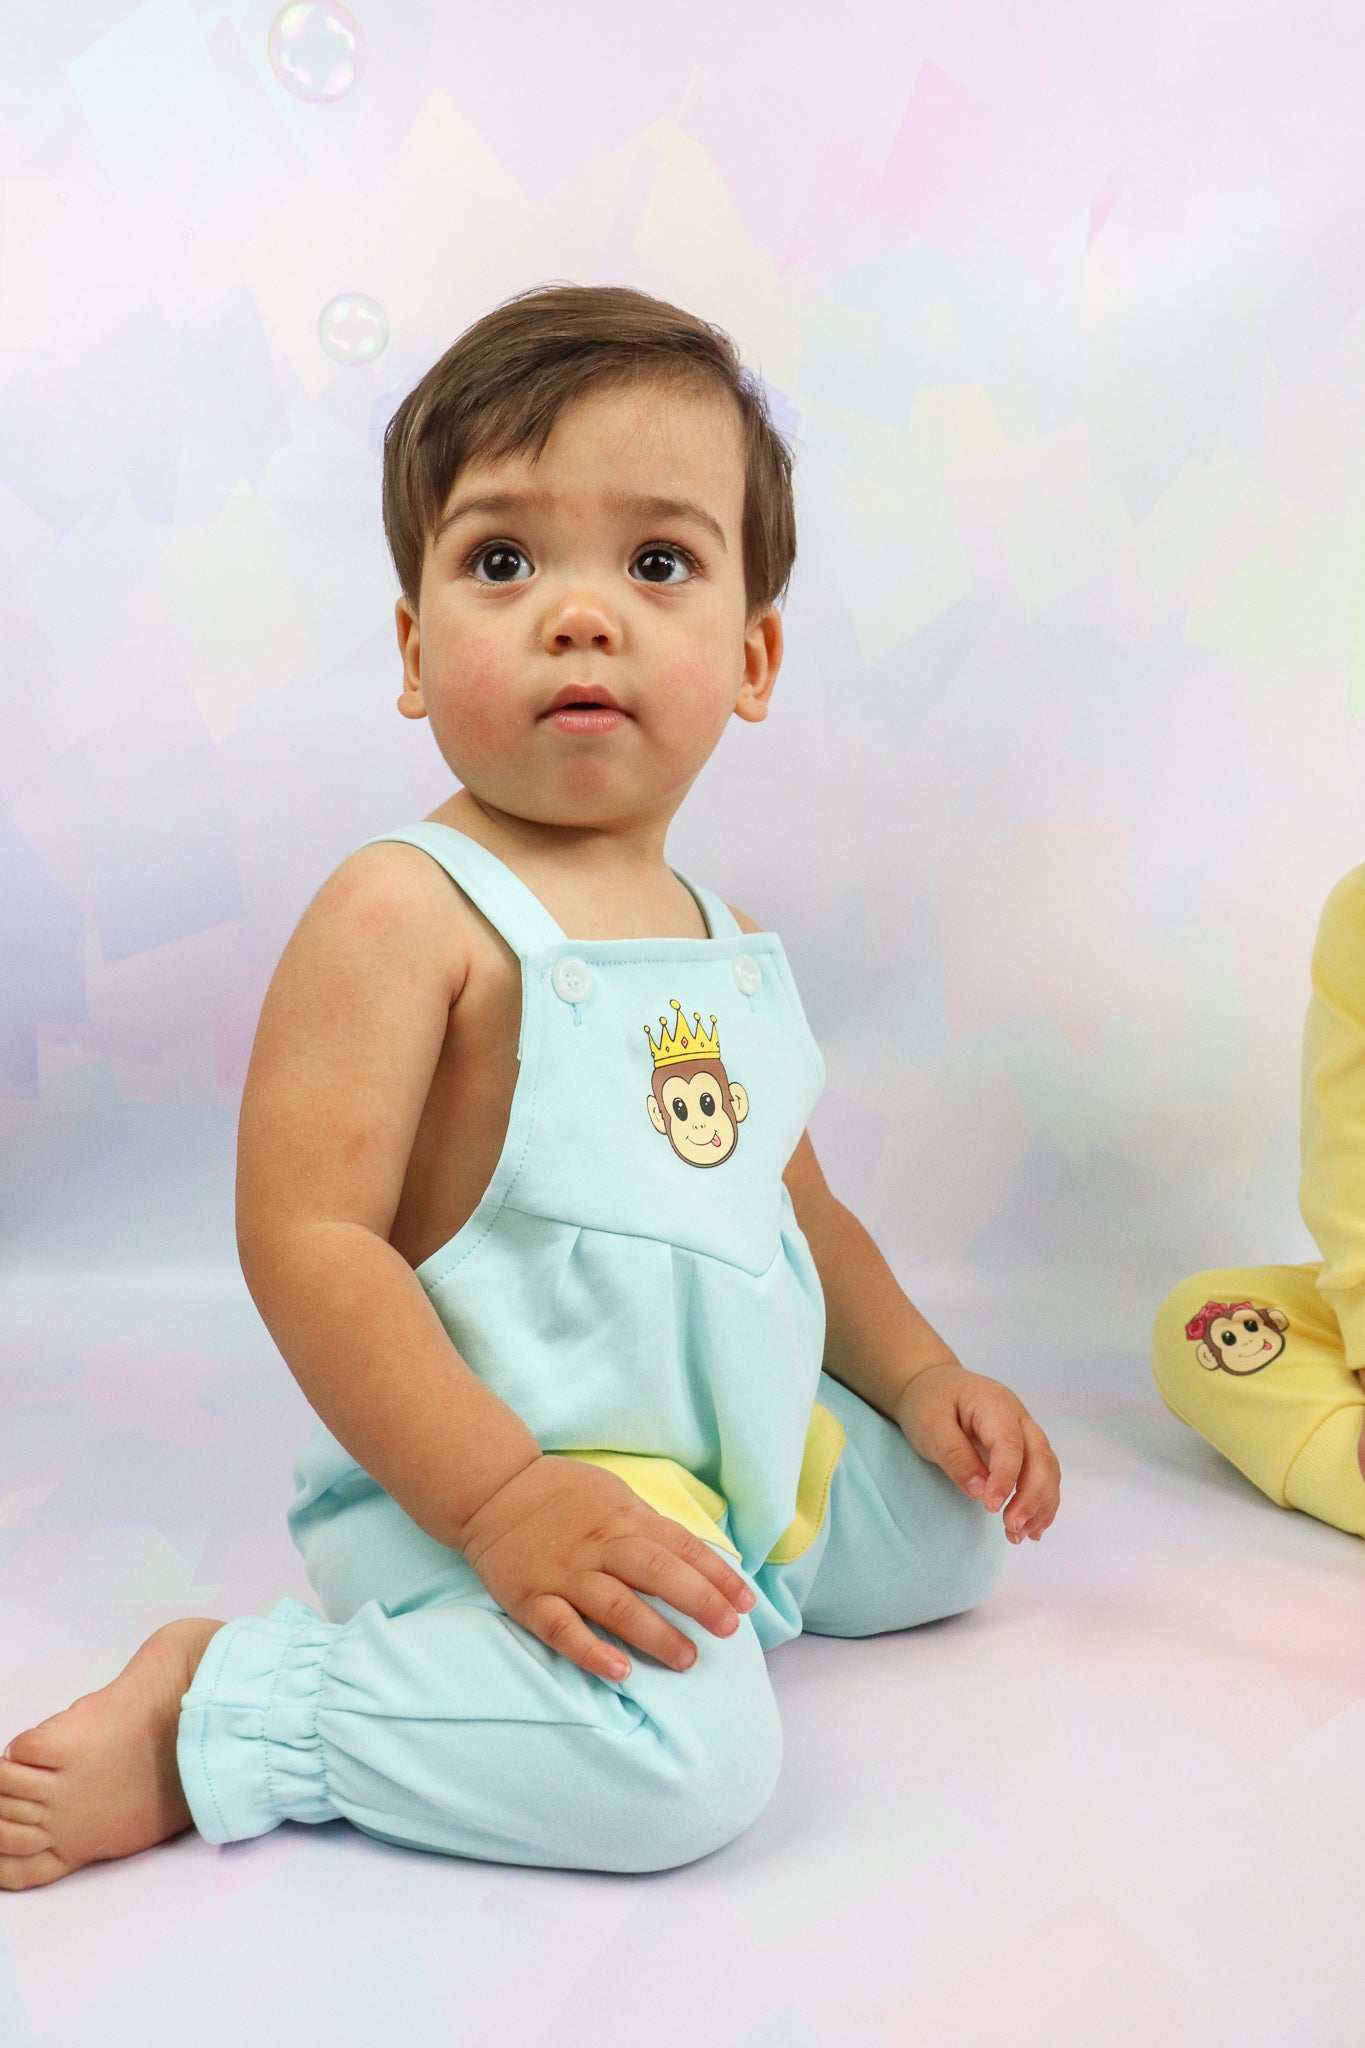 toddler boy sitting down wearing pastel blue overalls with a cute monkey design